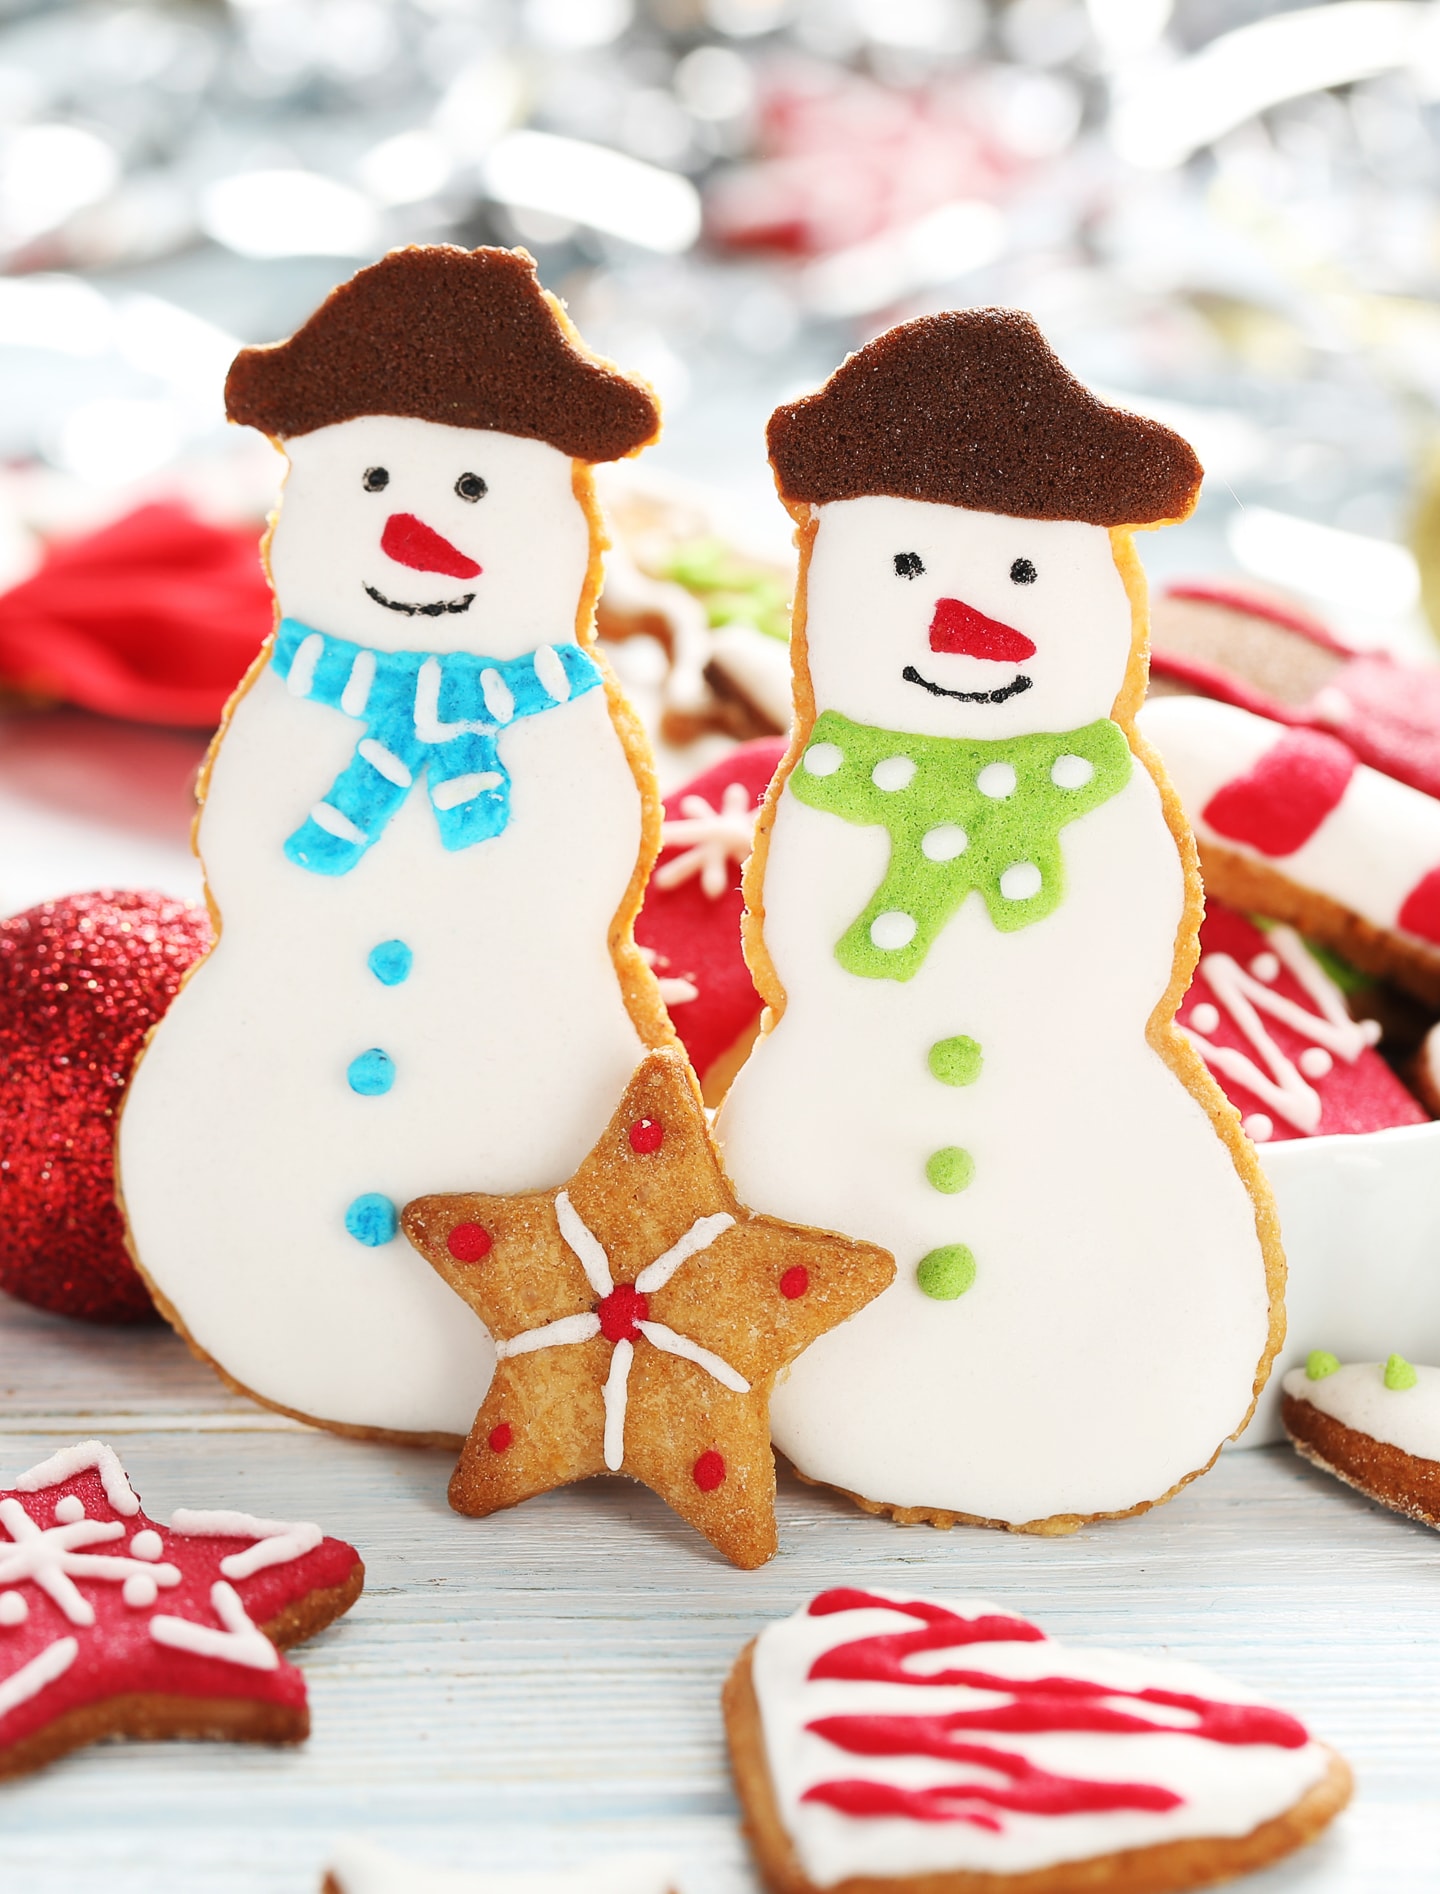 Two decorated snowman cookies on a table with other cut out cookies.